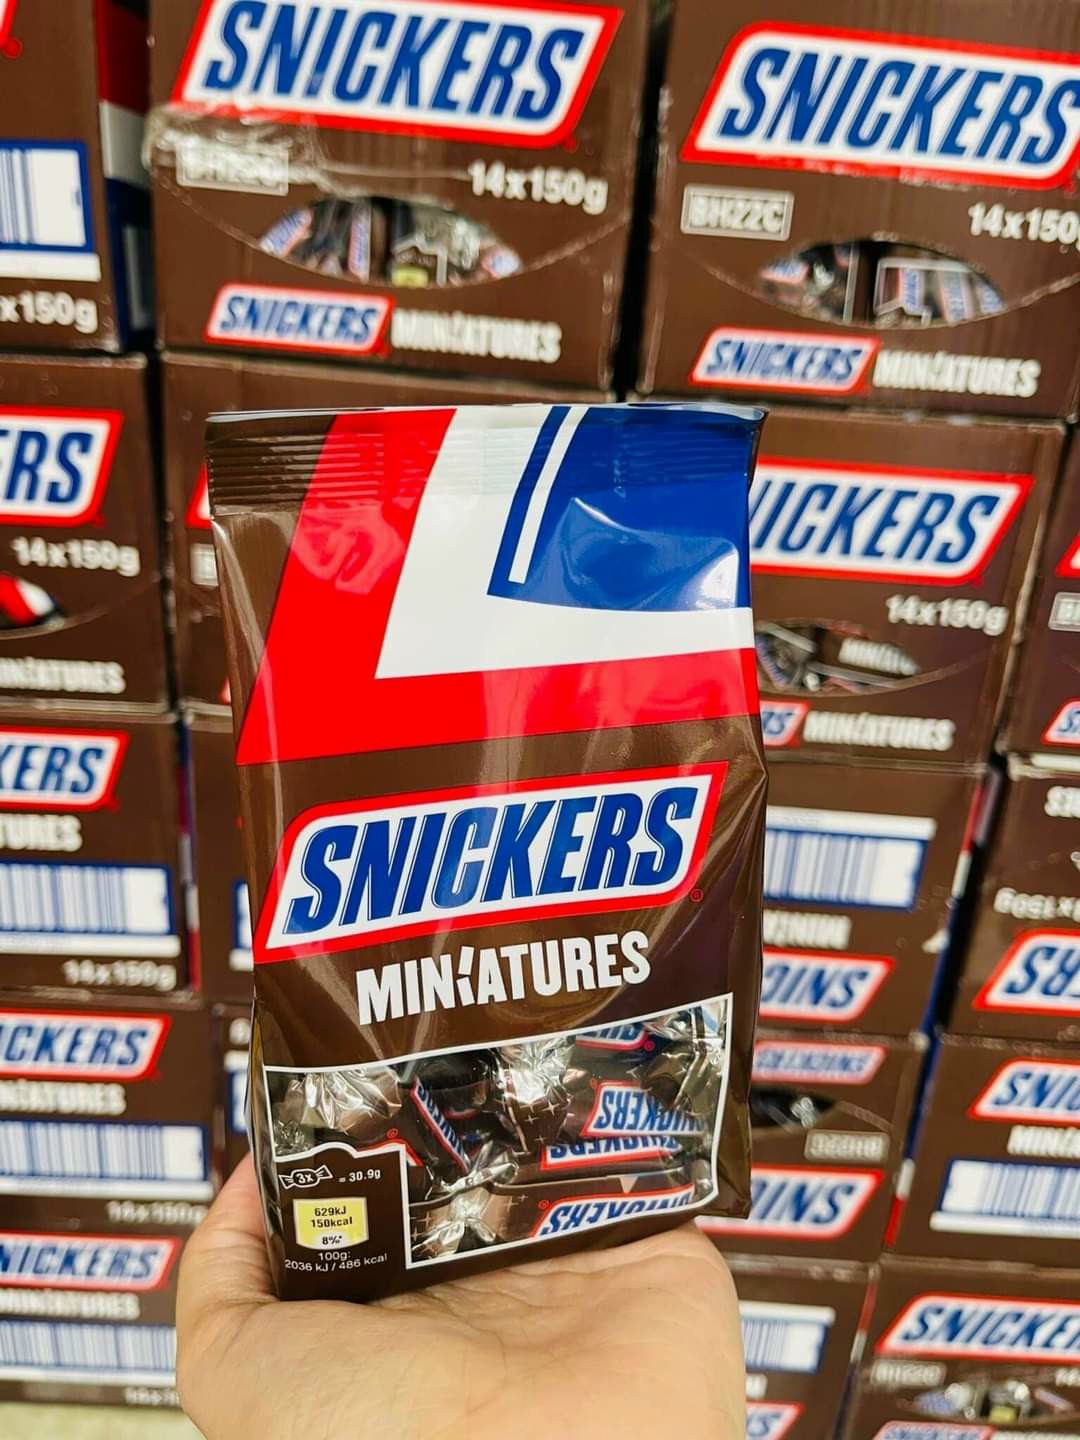 Chocolate Snickers Miniatures 150gr